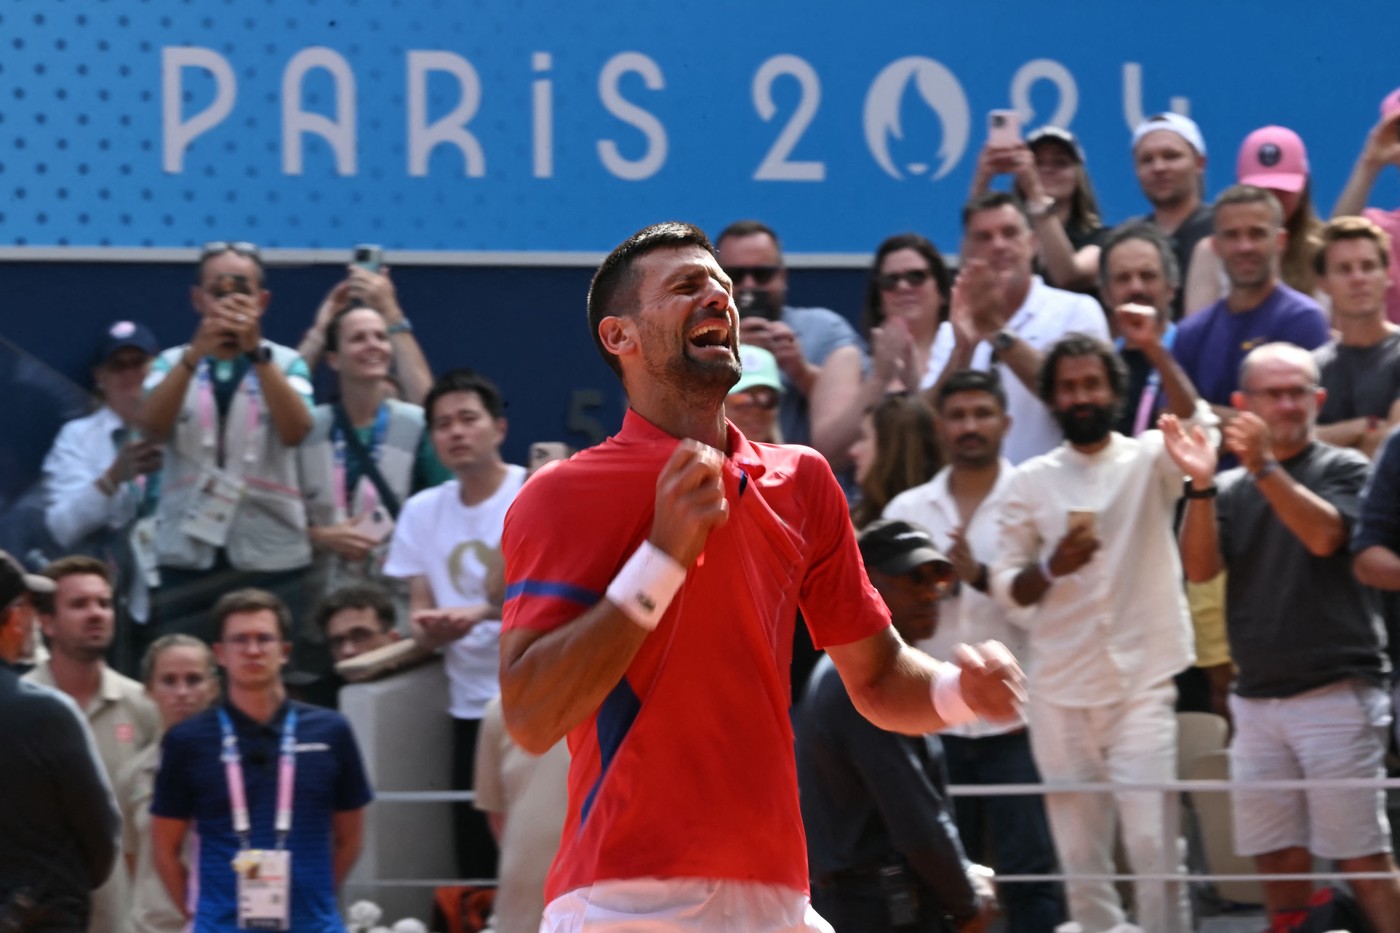 Serbia's Novak Djokovic reacts to beating Spain's Carlos Alcaraz in their men's singles final tennis match on Court Philippe-Chatrier at the Roland-Garros Stadium during the Paris 2024 Olympic Games, in Paris on August 4, 2024.,Image: 895899779, License: Rights-managed, Restrictions: , Model Release: no